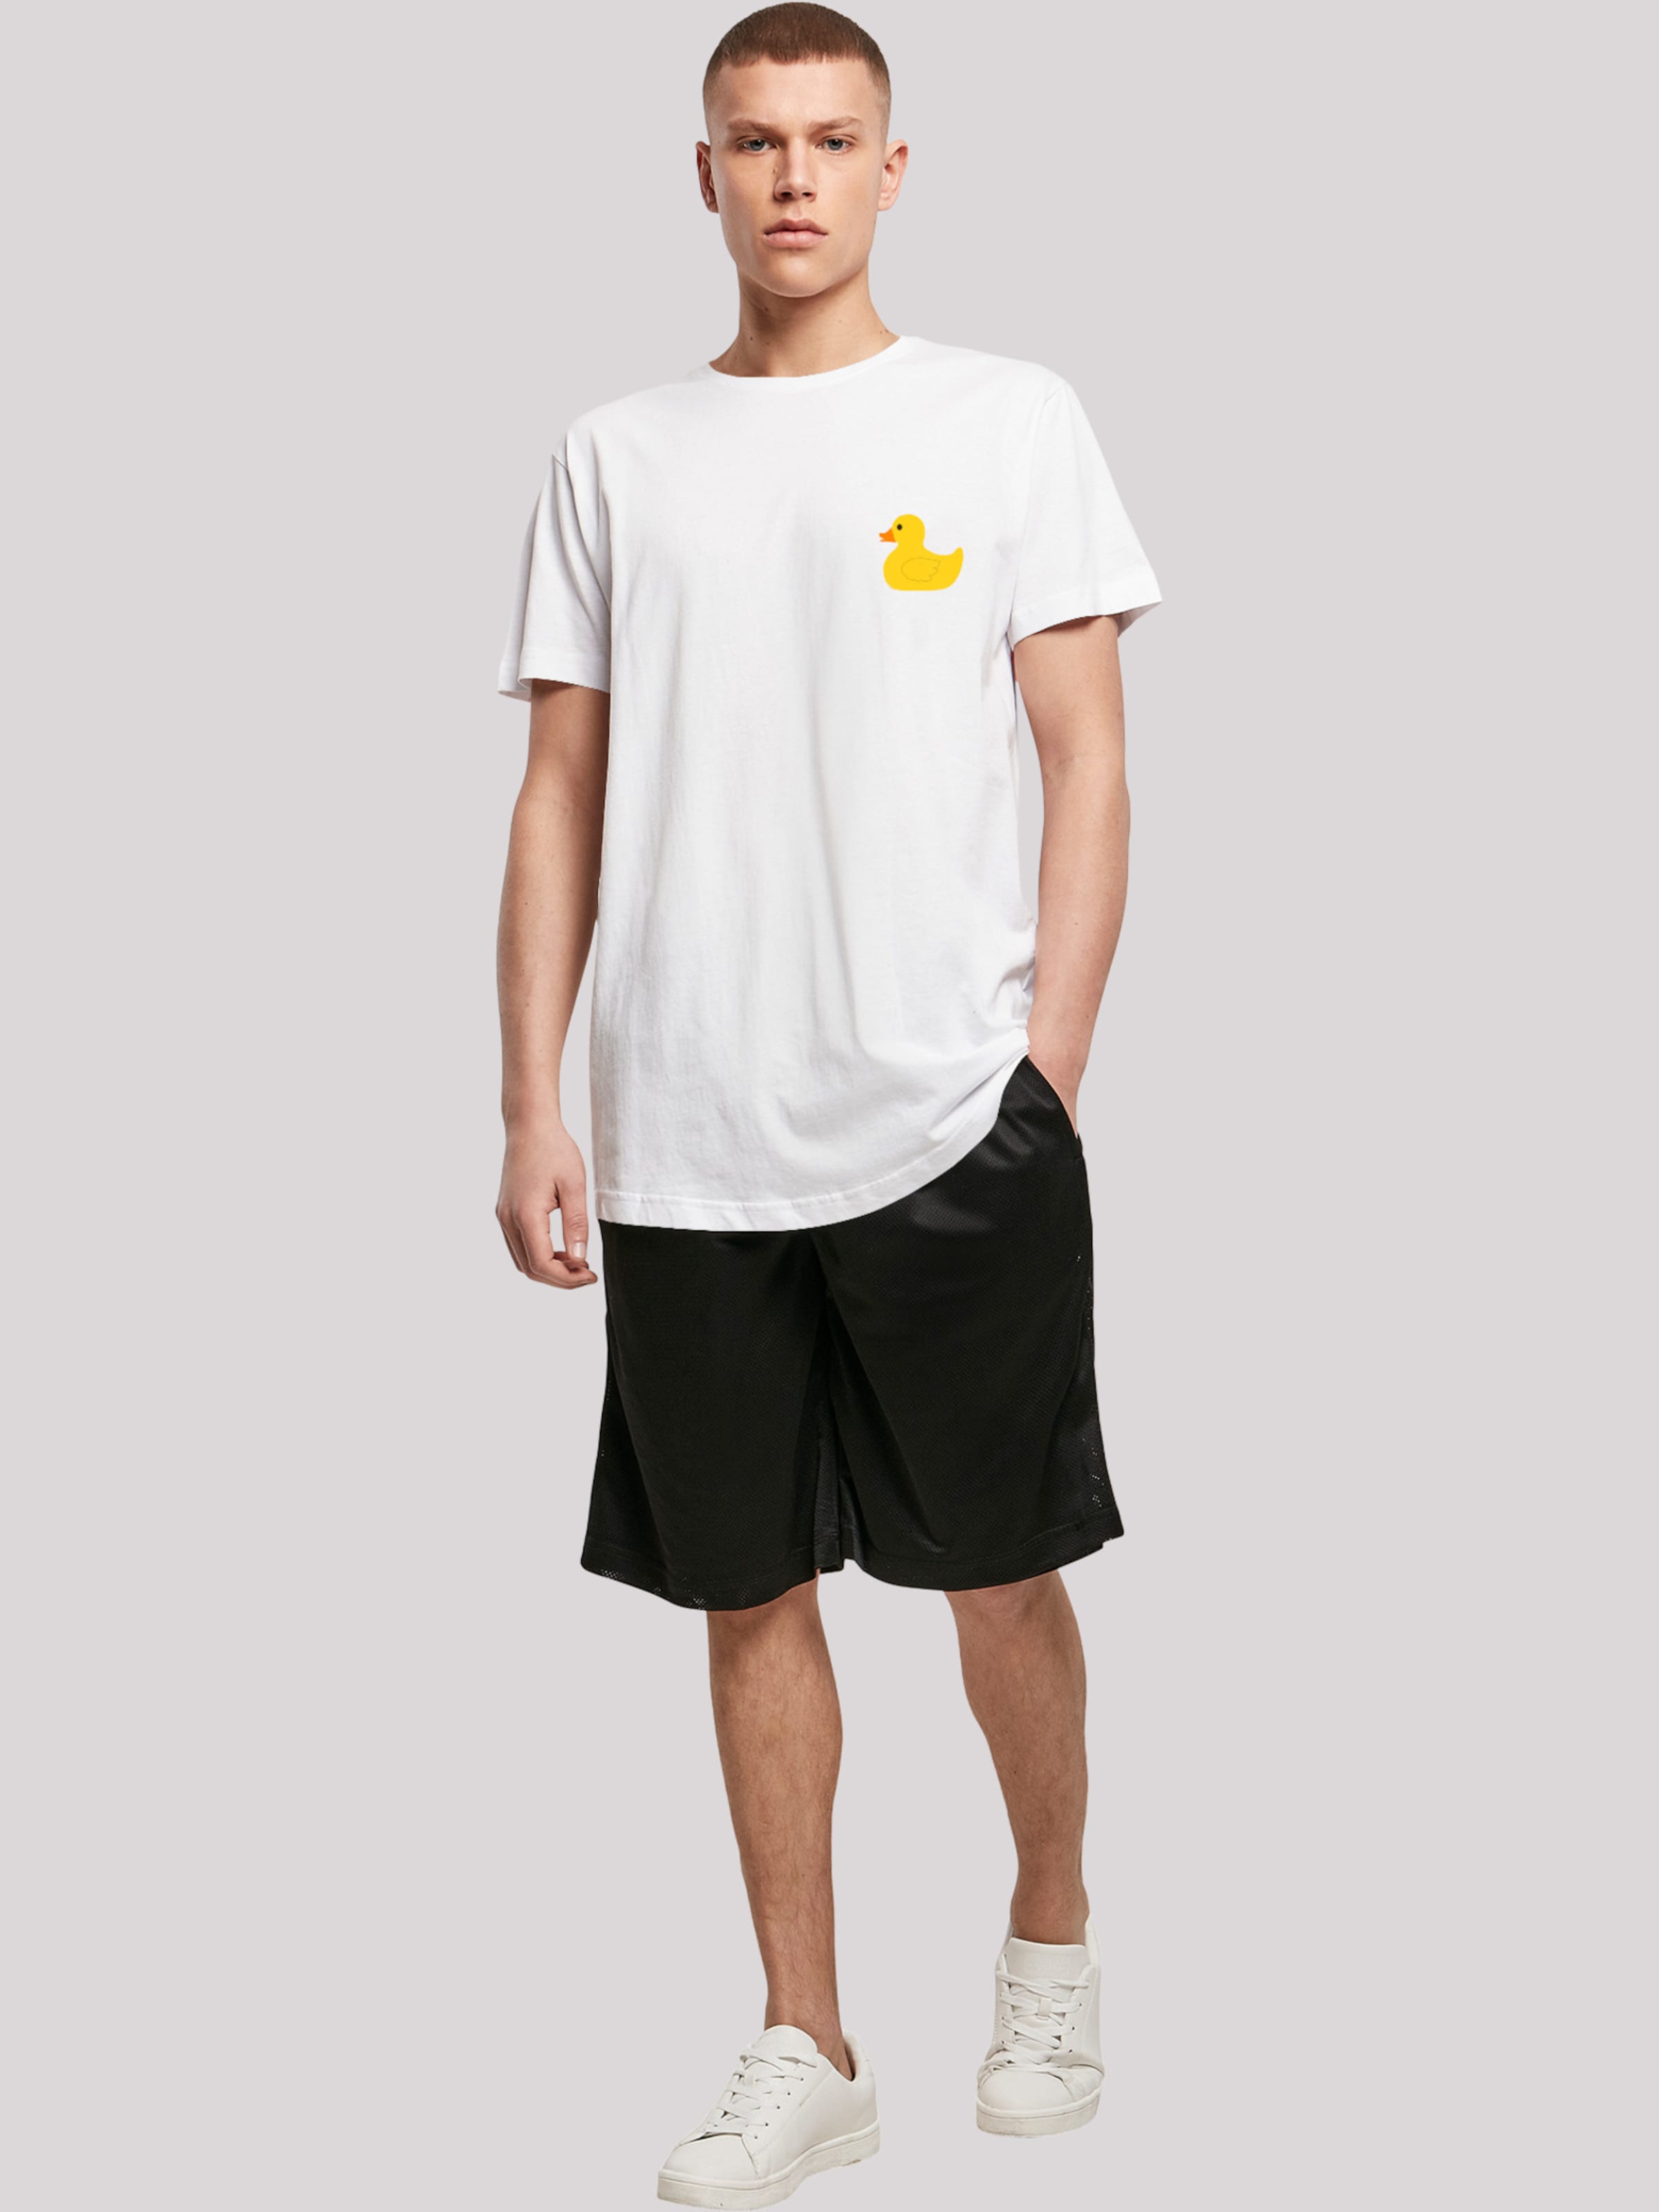 F4NT4STIC Shirt 'Yellow Rubber Duck' in White | ABOUT YOU